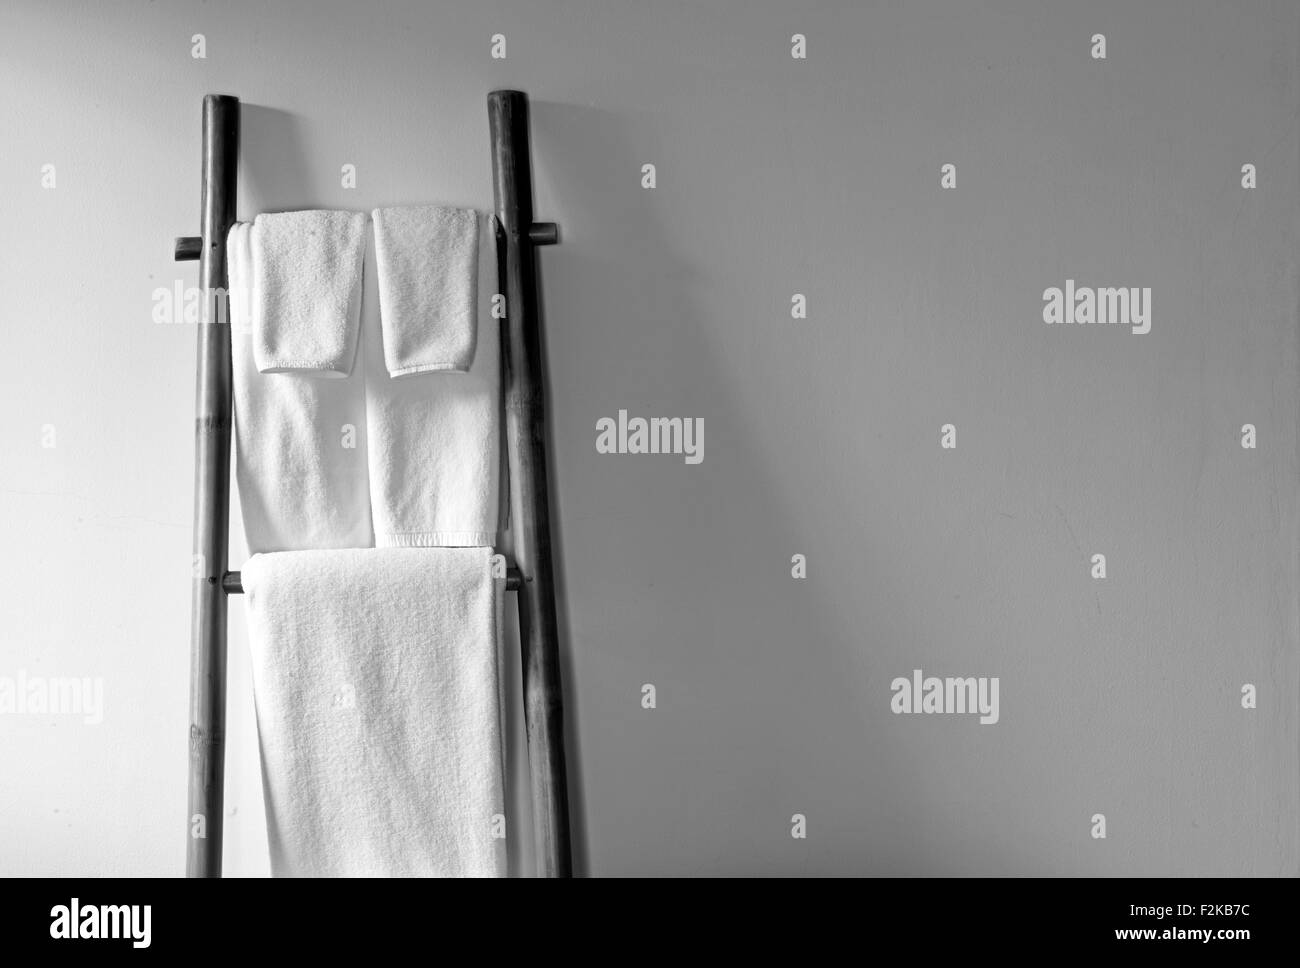 Towels hanging on the bamboo hanger and ready to use Stock Photo